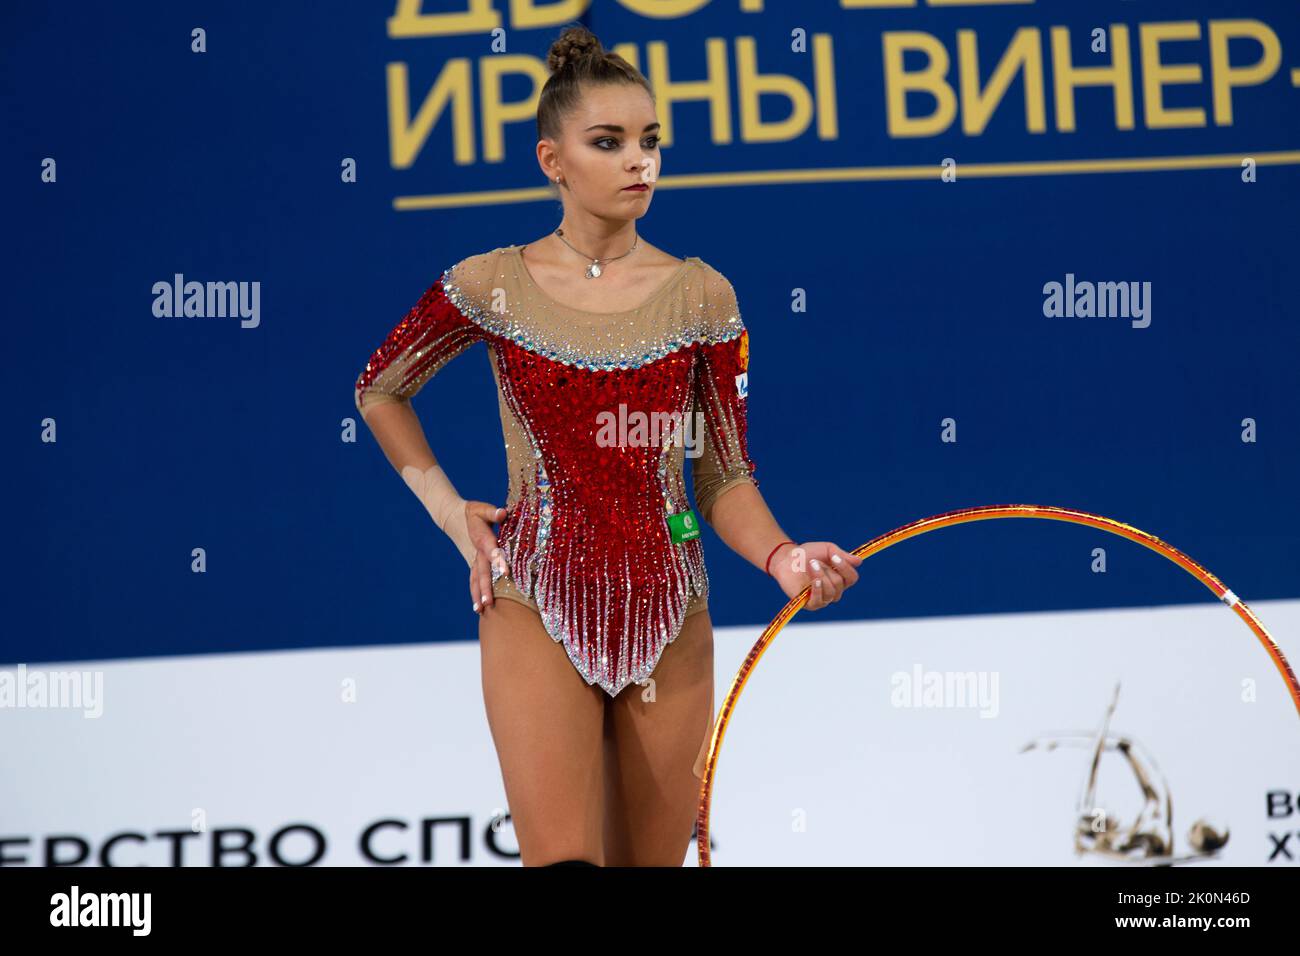 Moscow, Russia. 12th of September, 2022. Arina Averina performs her hoop routine in a qualification at the 2022 All-Russian Summer Spartakiad in Rhythmic Gymnastics at Irina Viner-Usmanova Gymnastics Palace in Luzhniki in Moscow, Russia. Nikolay Vinokurov/Alamy Live News Stock Photo